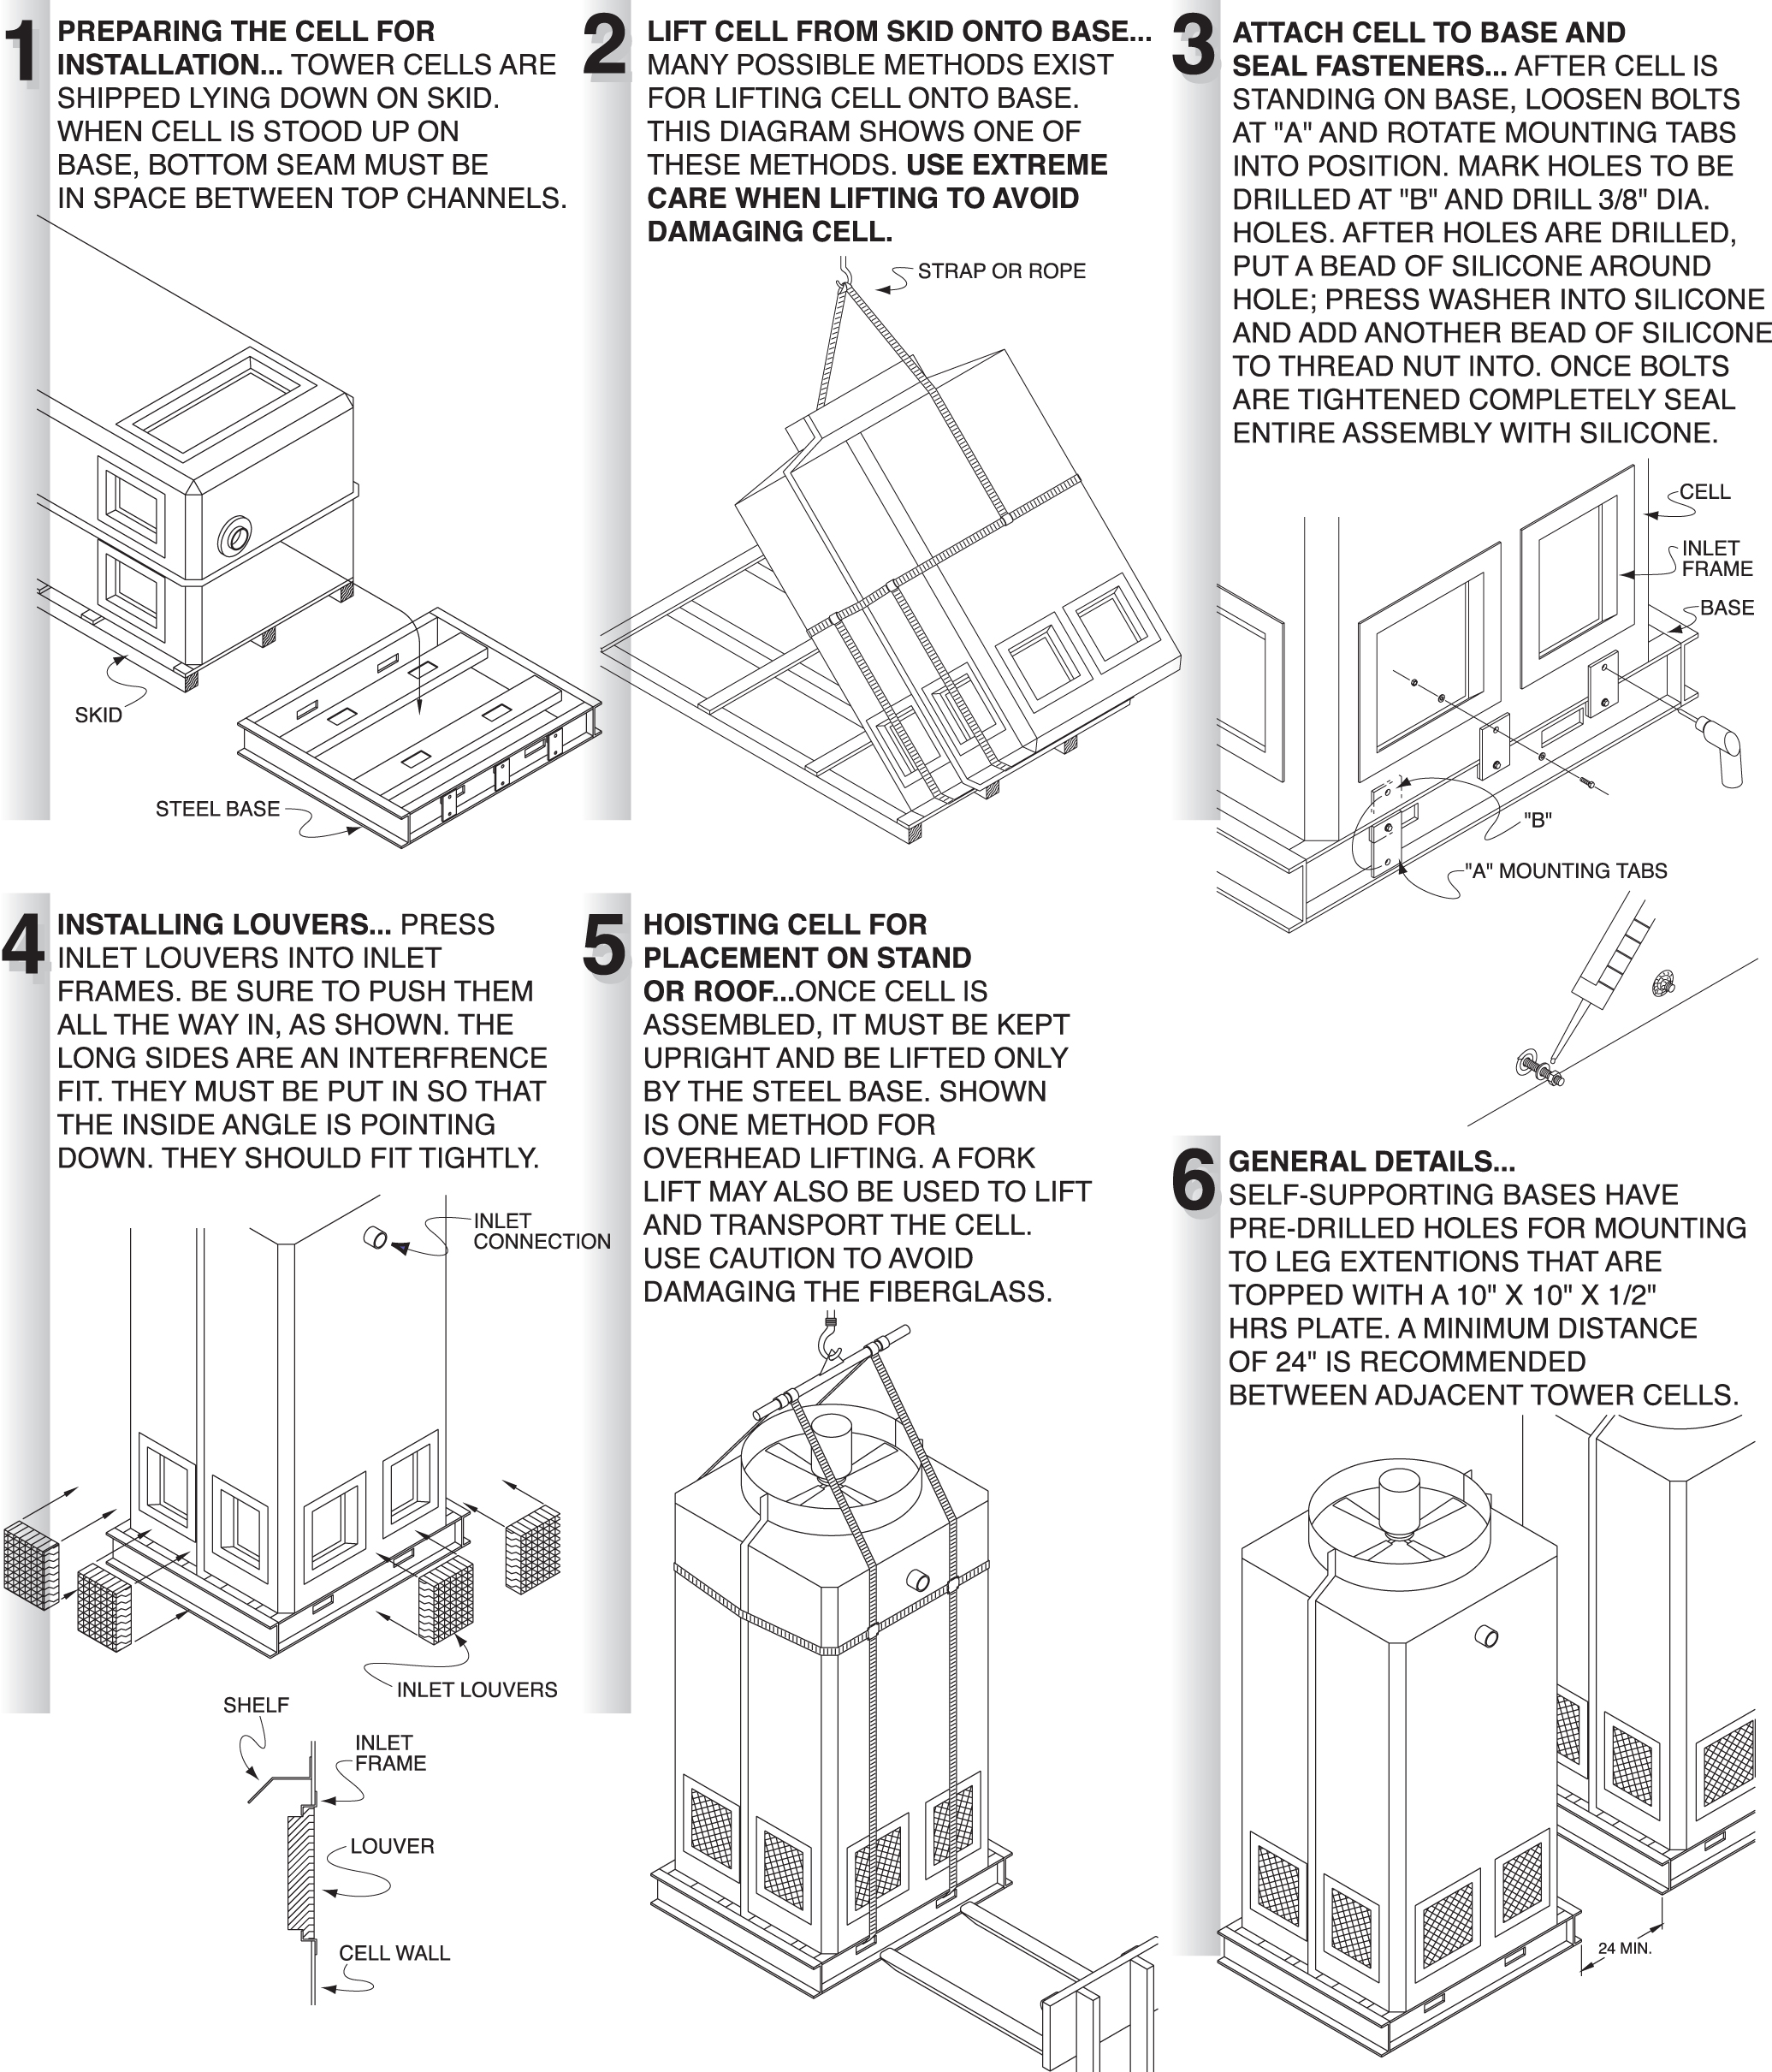 Site Assembly and Rigging Instructions